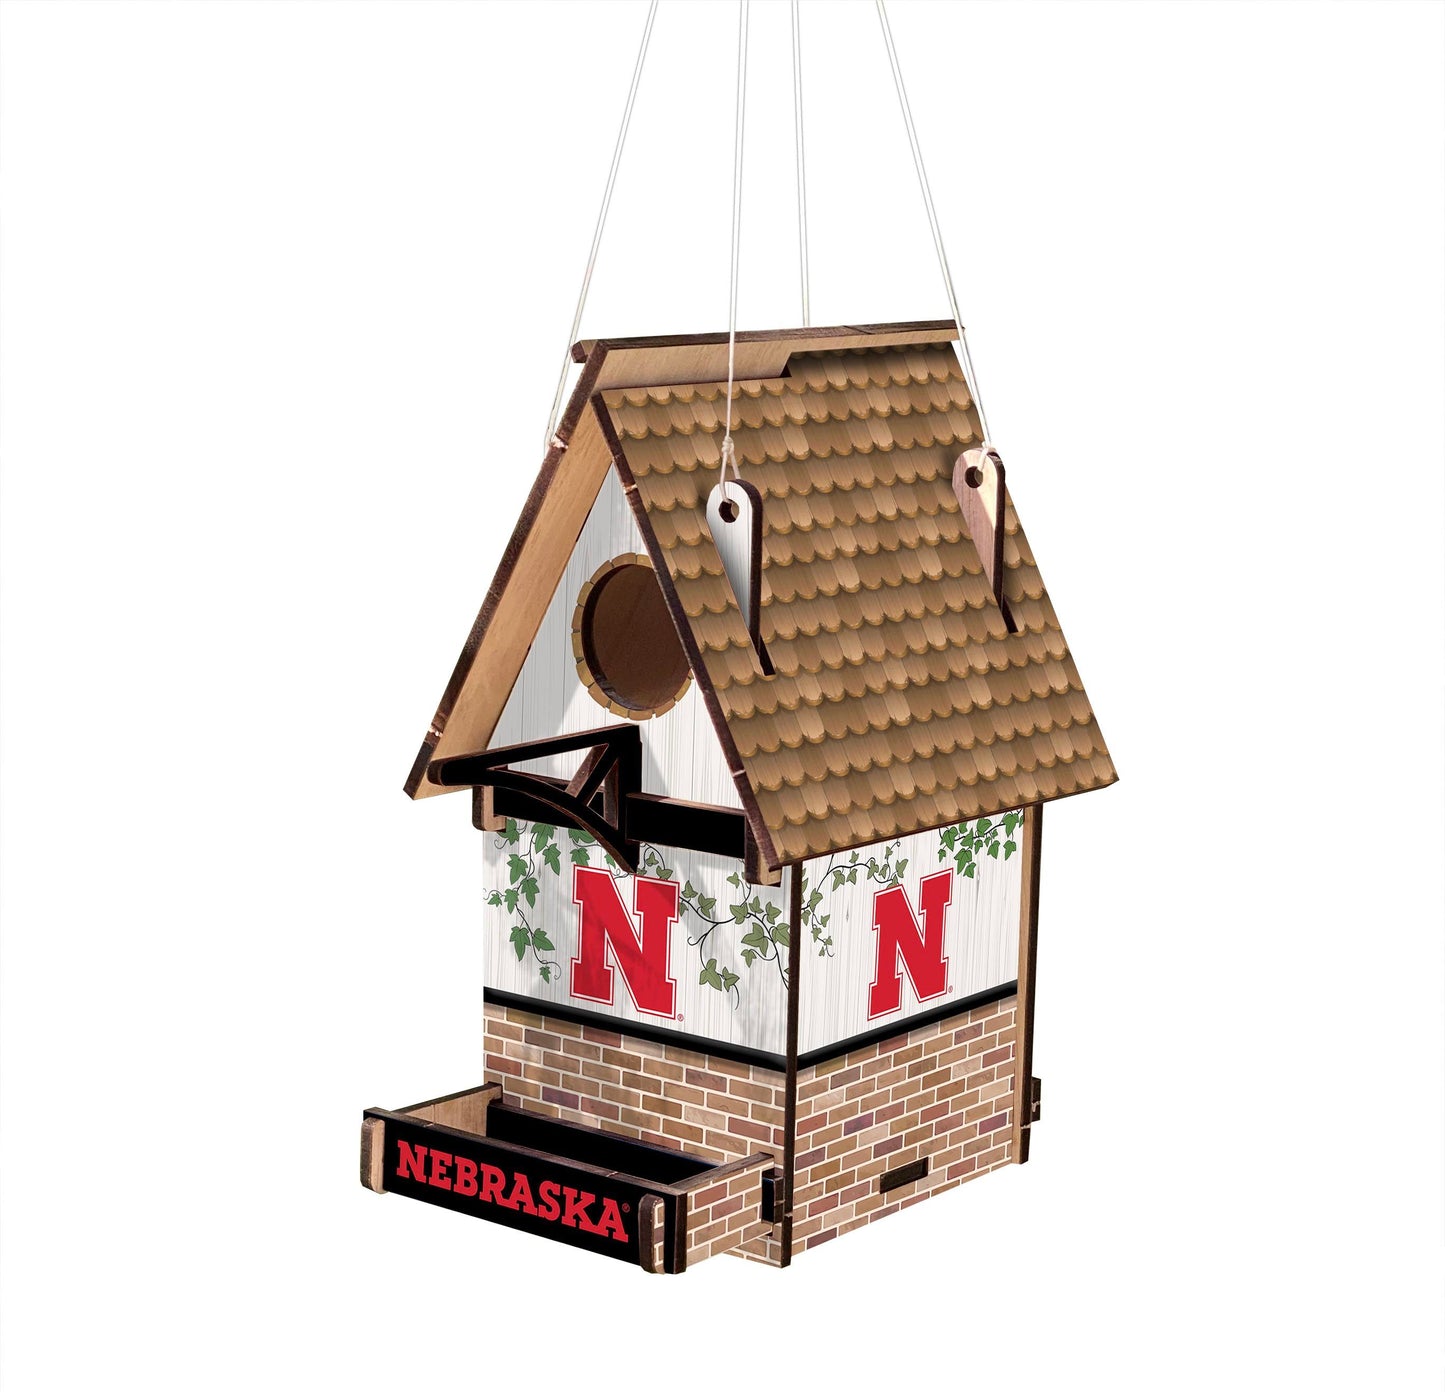 Show your school spirit and help the birds of Nebraska with this officially licensed Nebraska Cornhuskers Birdhouse. Made from high-quality, MDF, it features colorful team graphics and colors